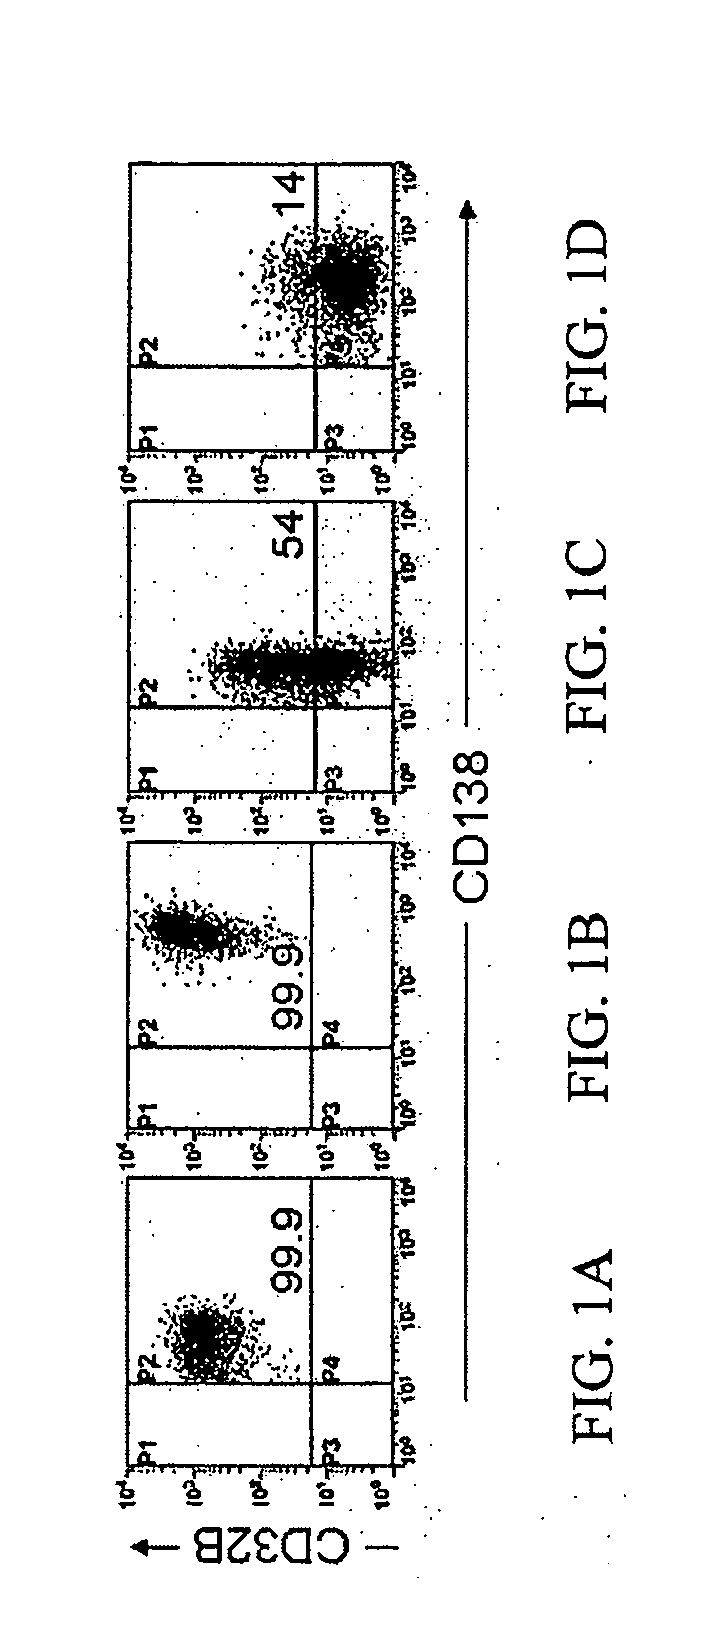 Methods of diagnosing, treating, or preventing plasma cell disorders